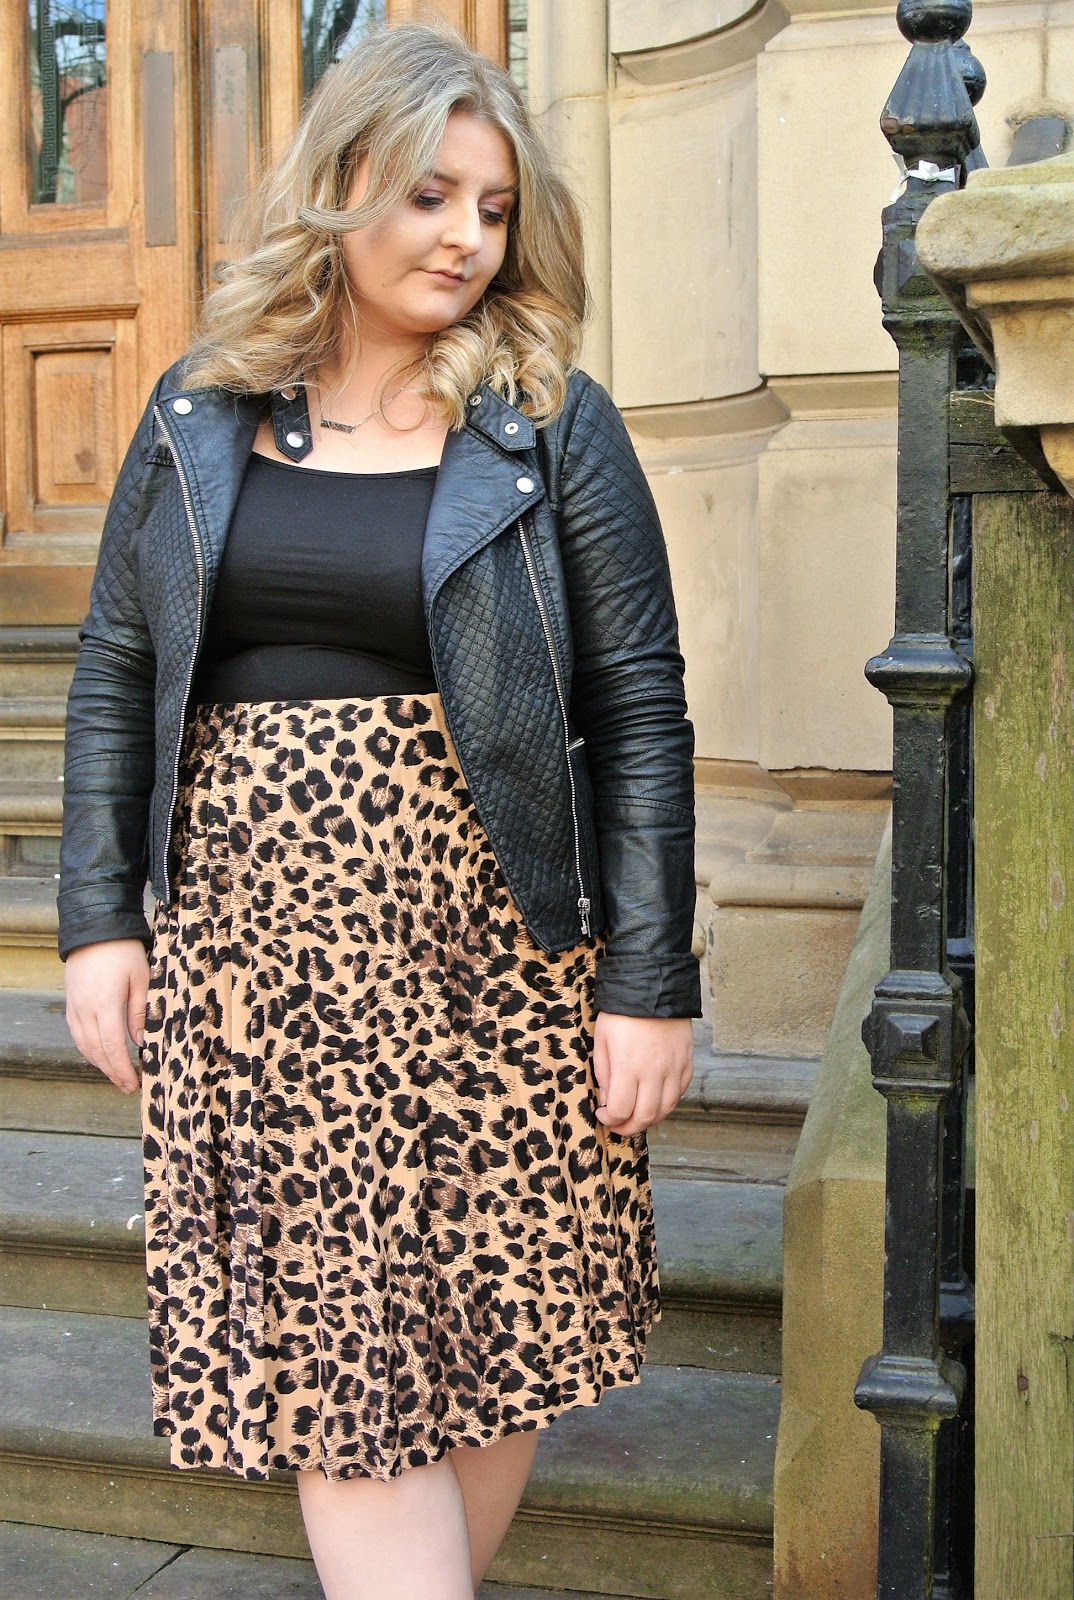 At understrege Uden for Uskyld OUTFIT POST: LEOPARD PRINT MIDI SKIRT - PRETTY YOUNG THING